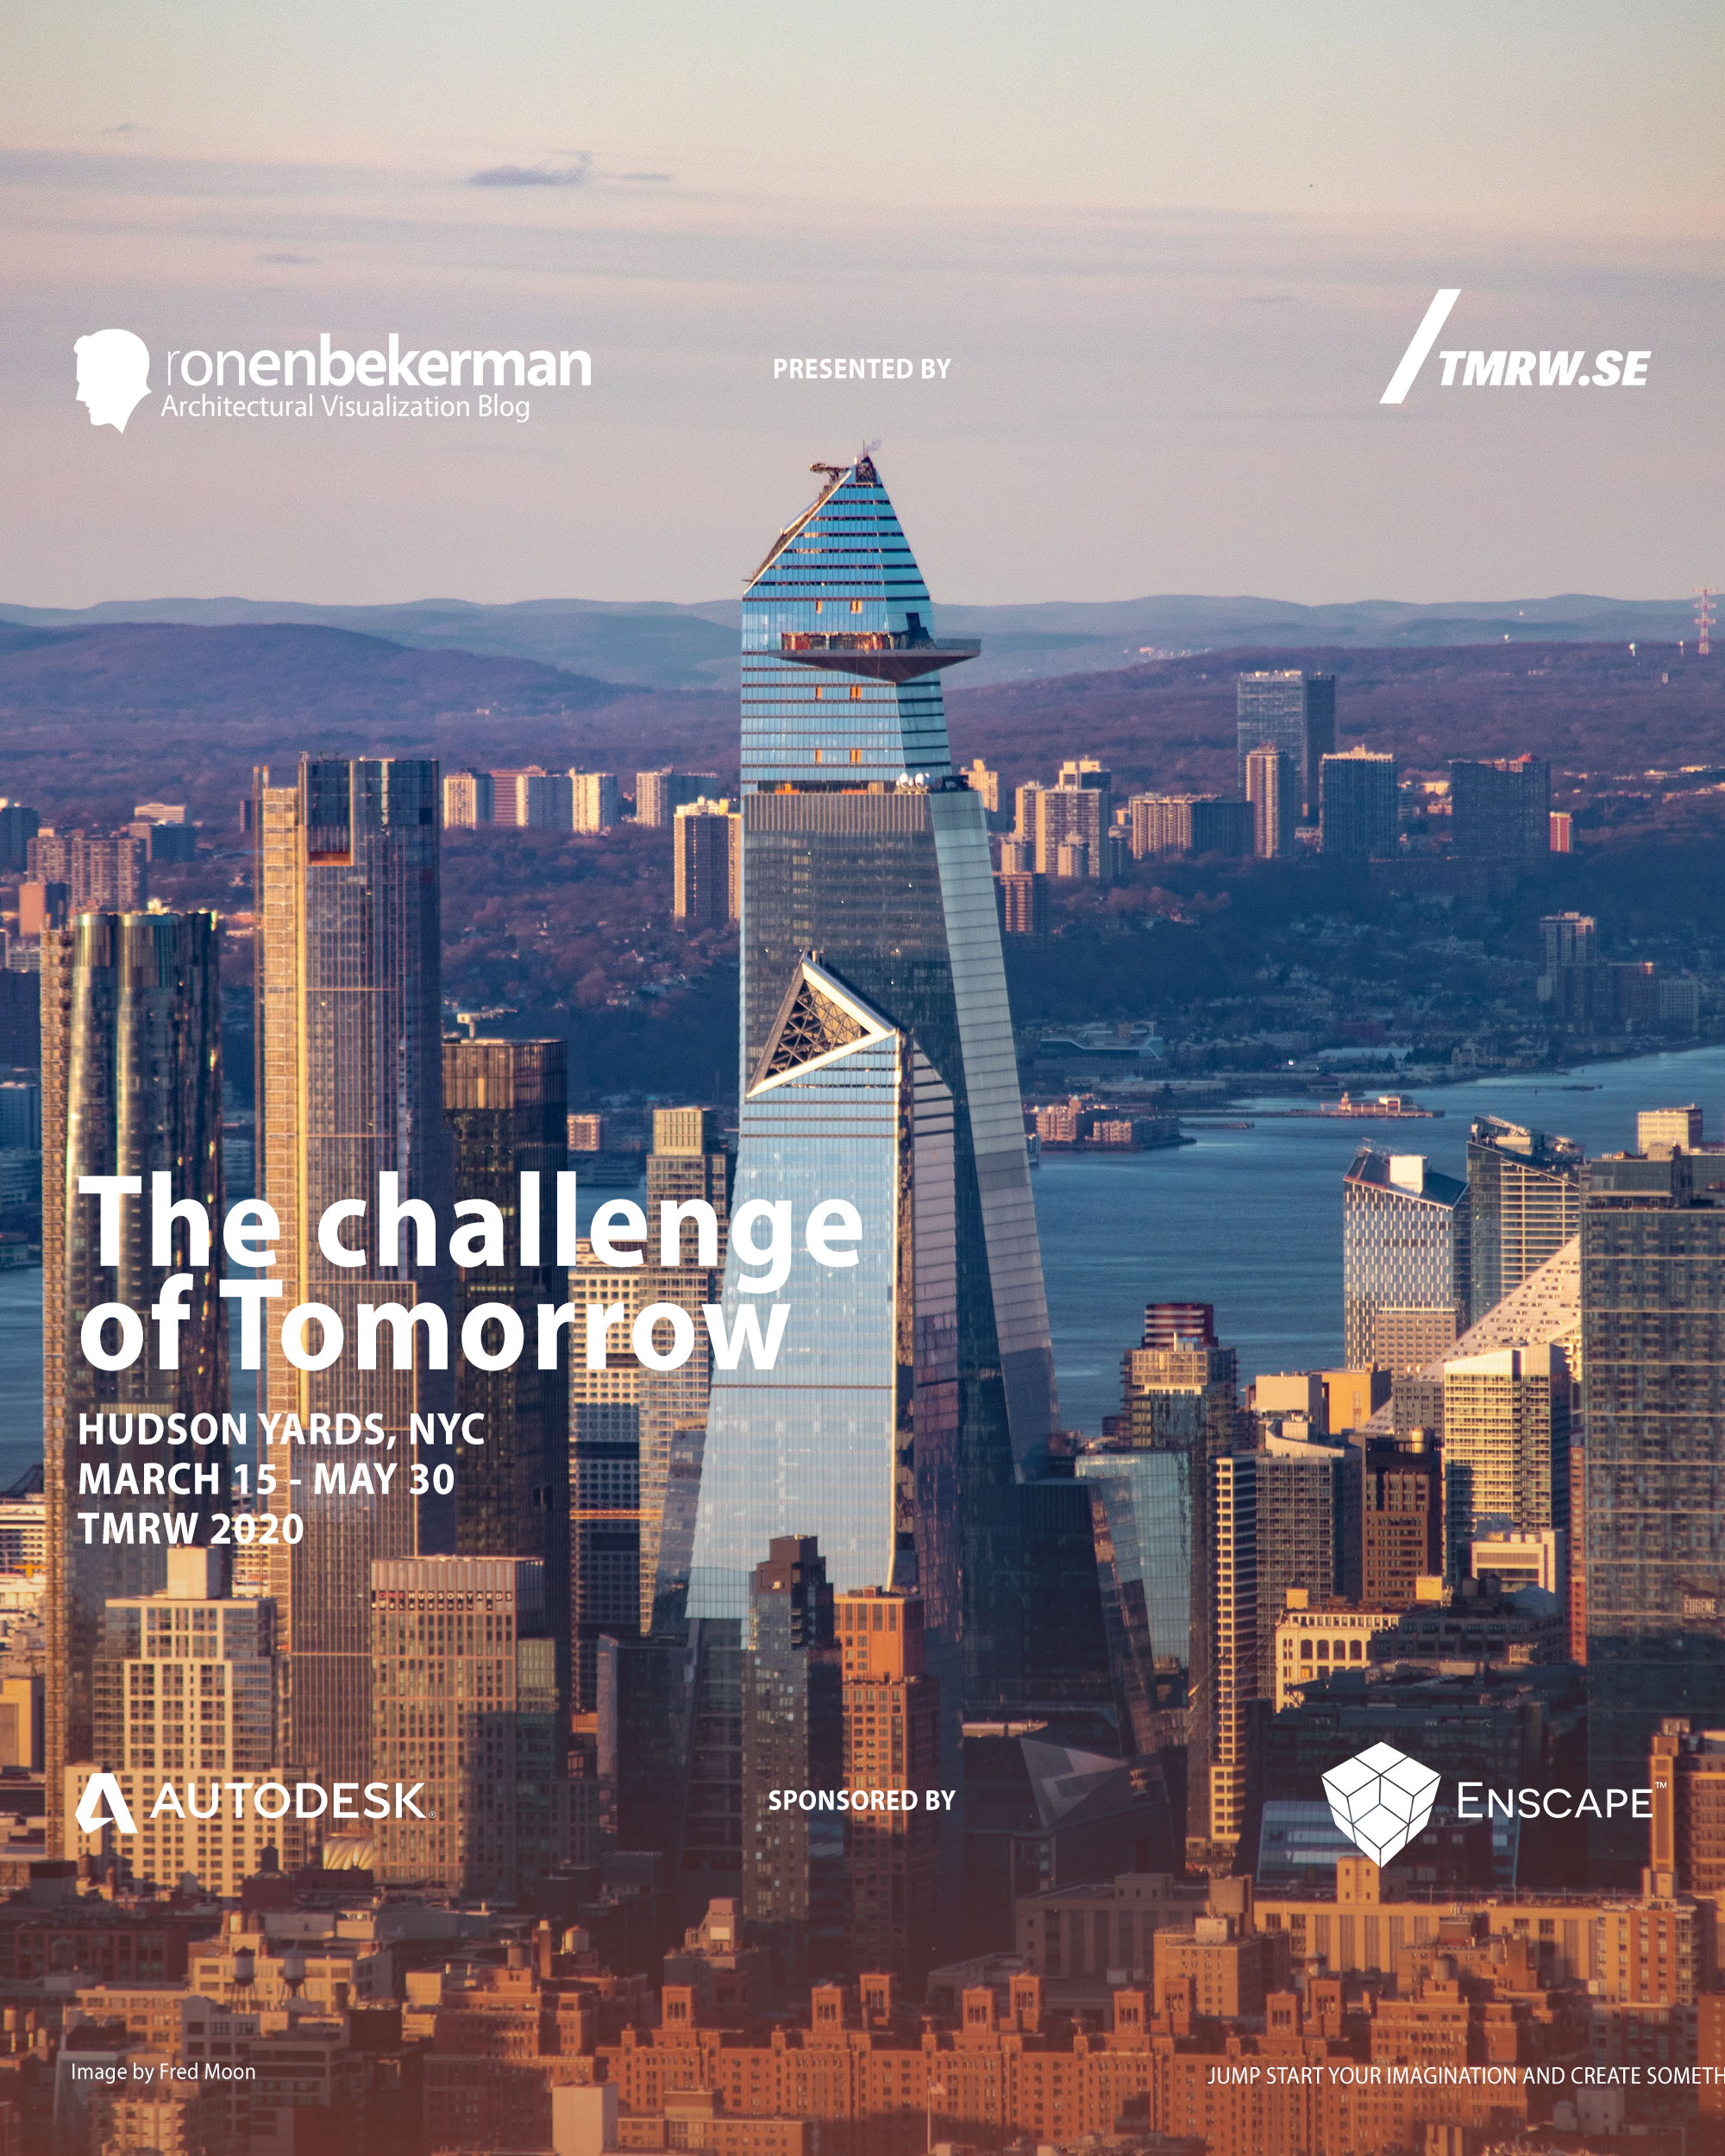 Introducing The Challenge of Tomorrow